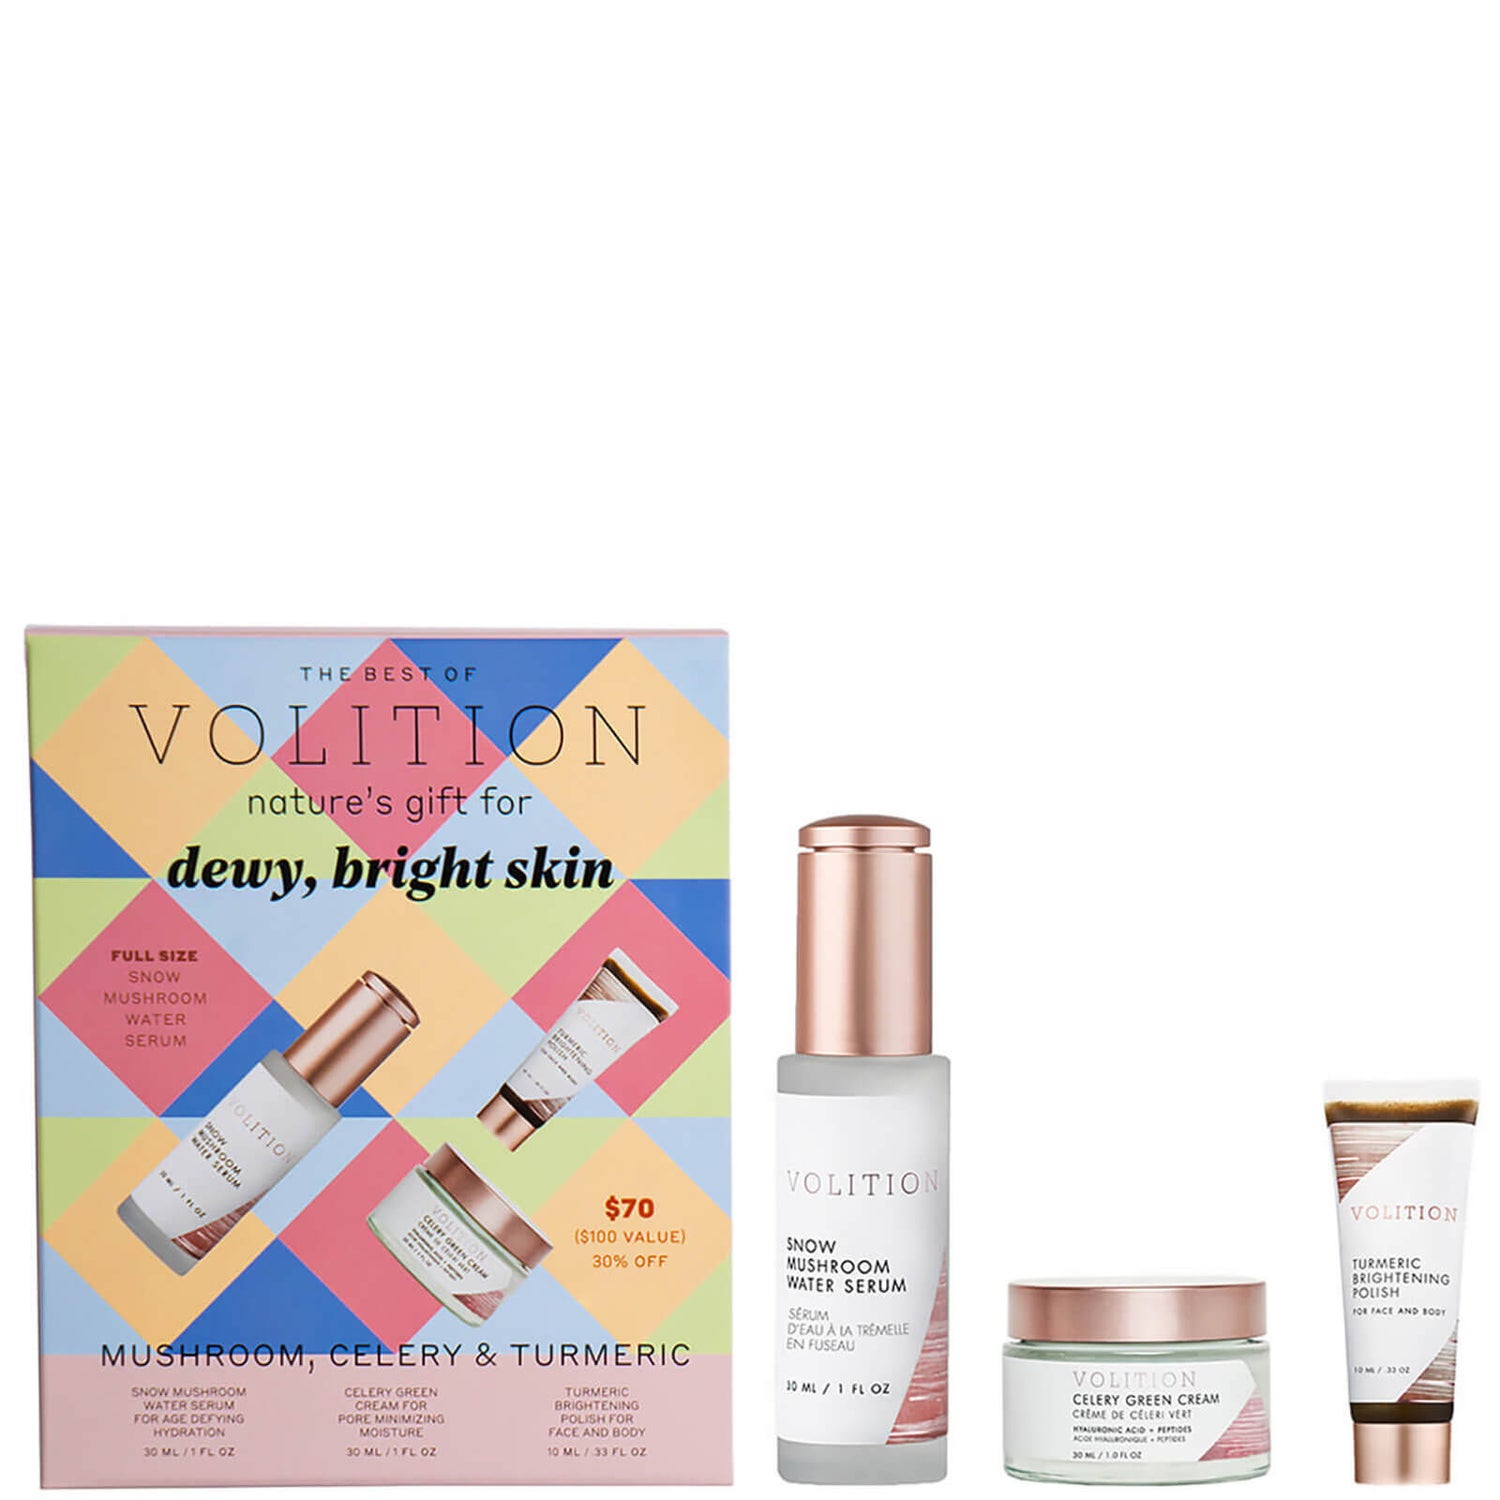 Volition Nature's Gift for Dewy, Bright Skin